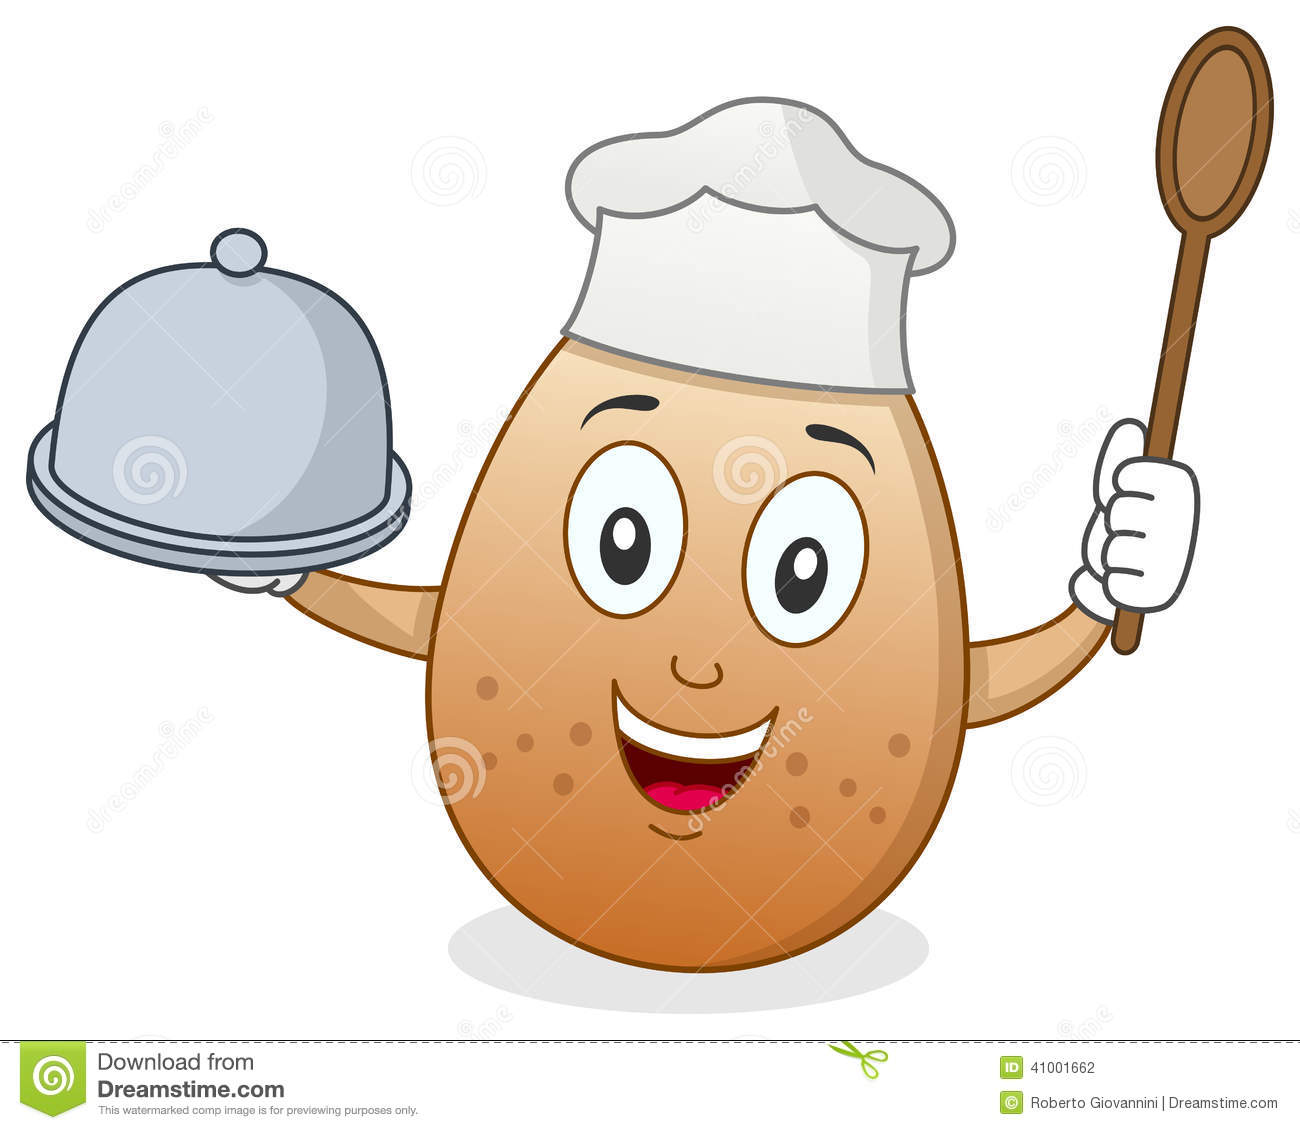 Chef Cartoon Egg With Tray And Spoon Funny Photo For Whatsapp